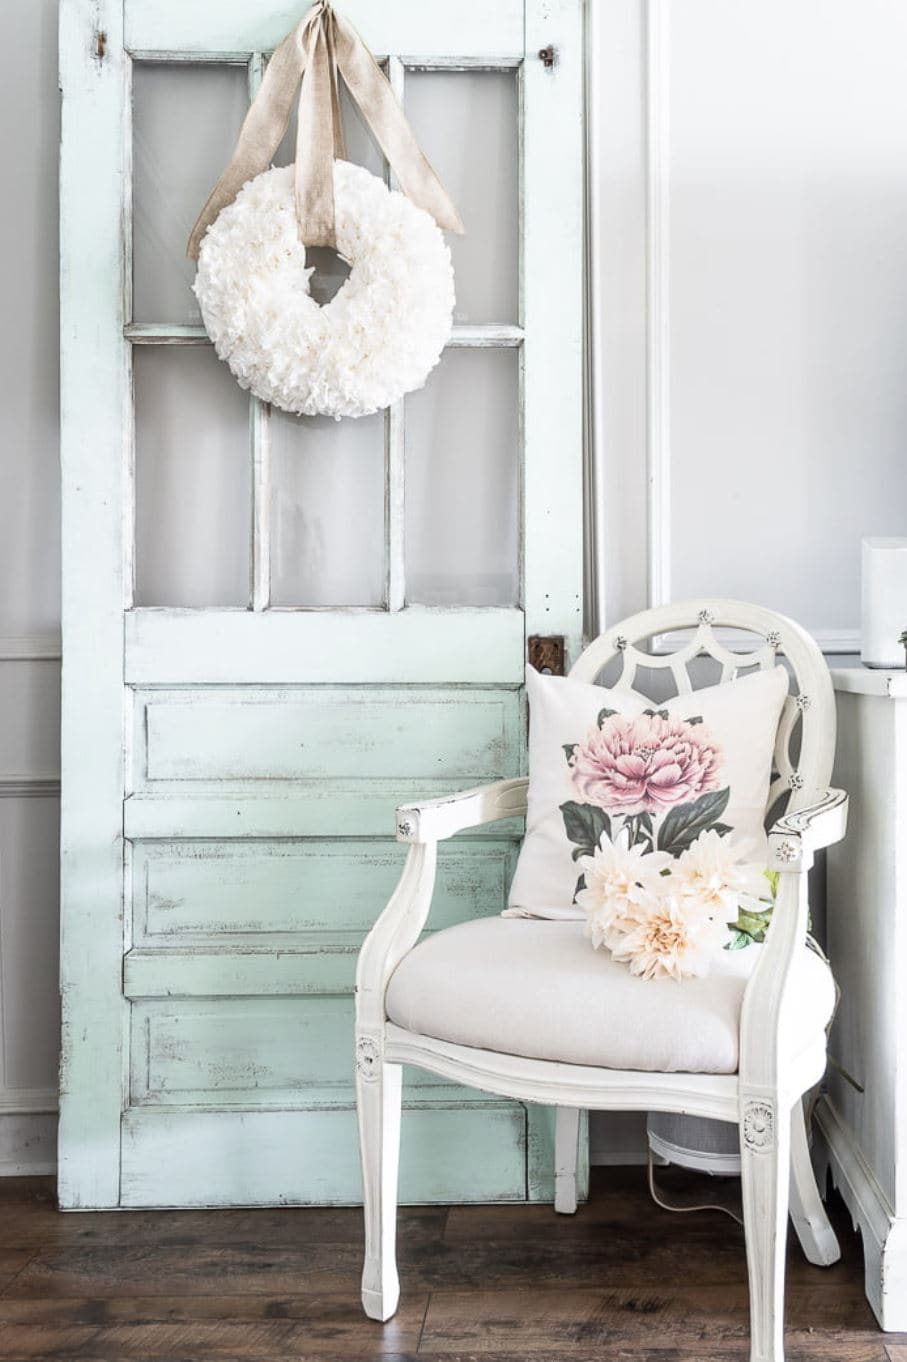 A white DIY coffee filter wreath hanging on a vintage door alongside a vintage chair.